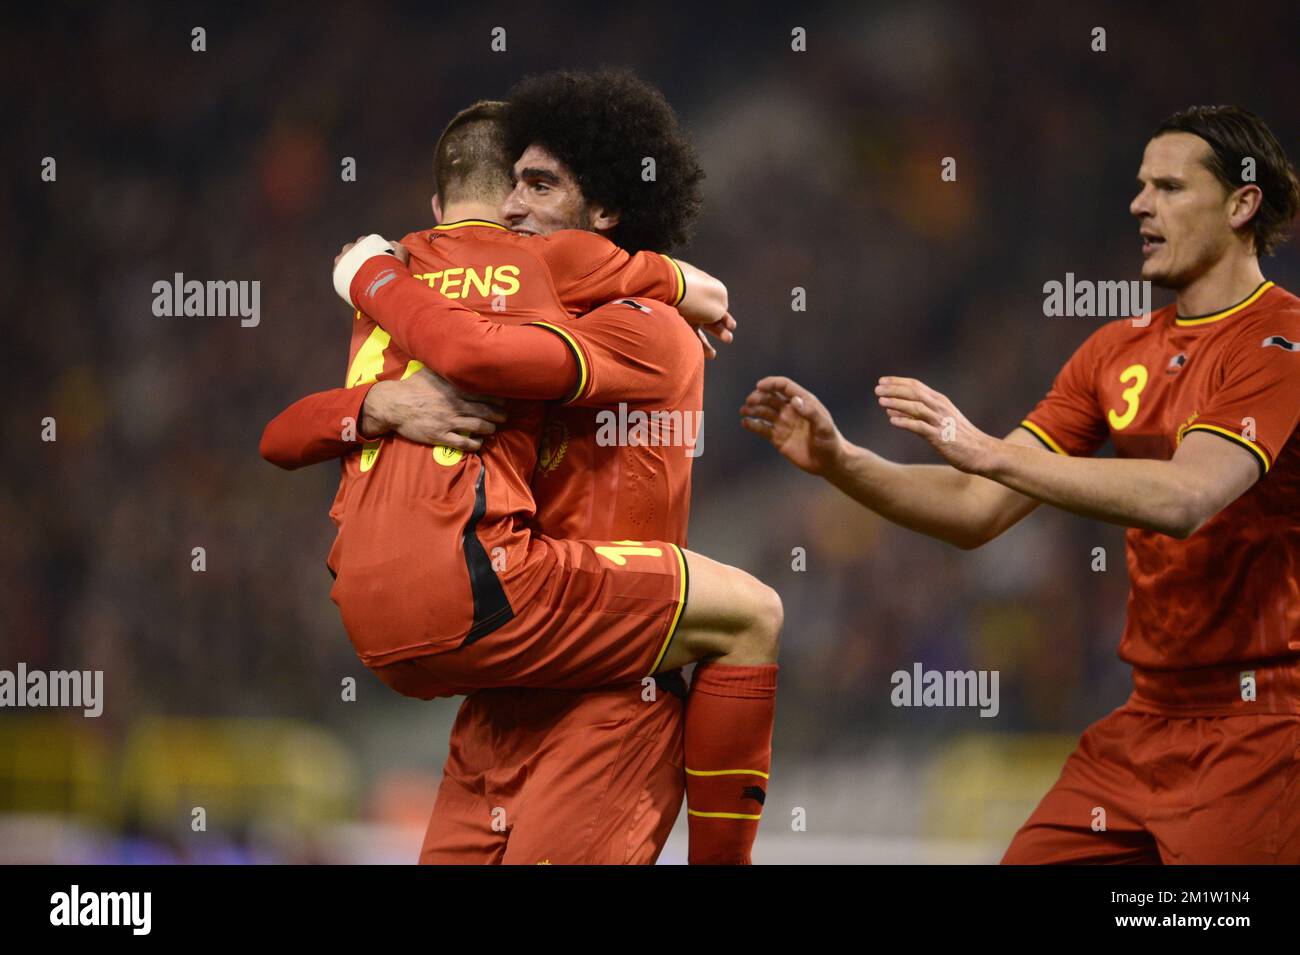 Belgium's Marouane Fellaini celebrates with Dries Mertens (L) and Daniel Van Buyten (R) after scoring the 1-0 goal during a friendly soccer game between the Belgian national team the Red Devils and Ivory Coast, Wednesday 05 March 2014 in Brussels.  Stock Photo